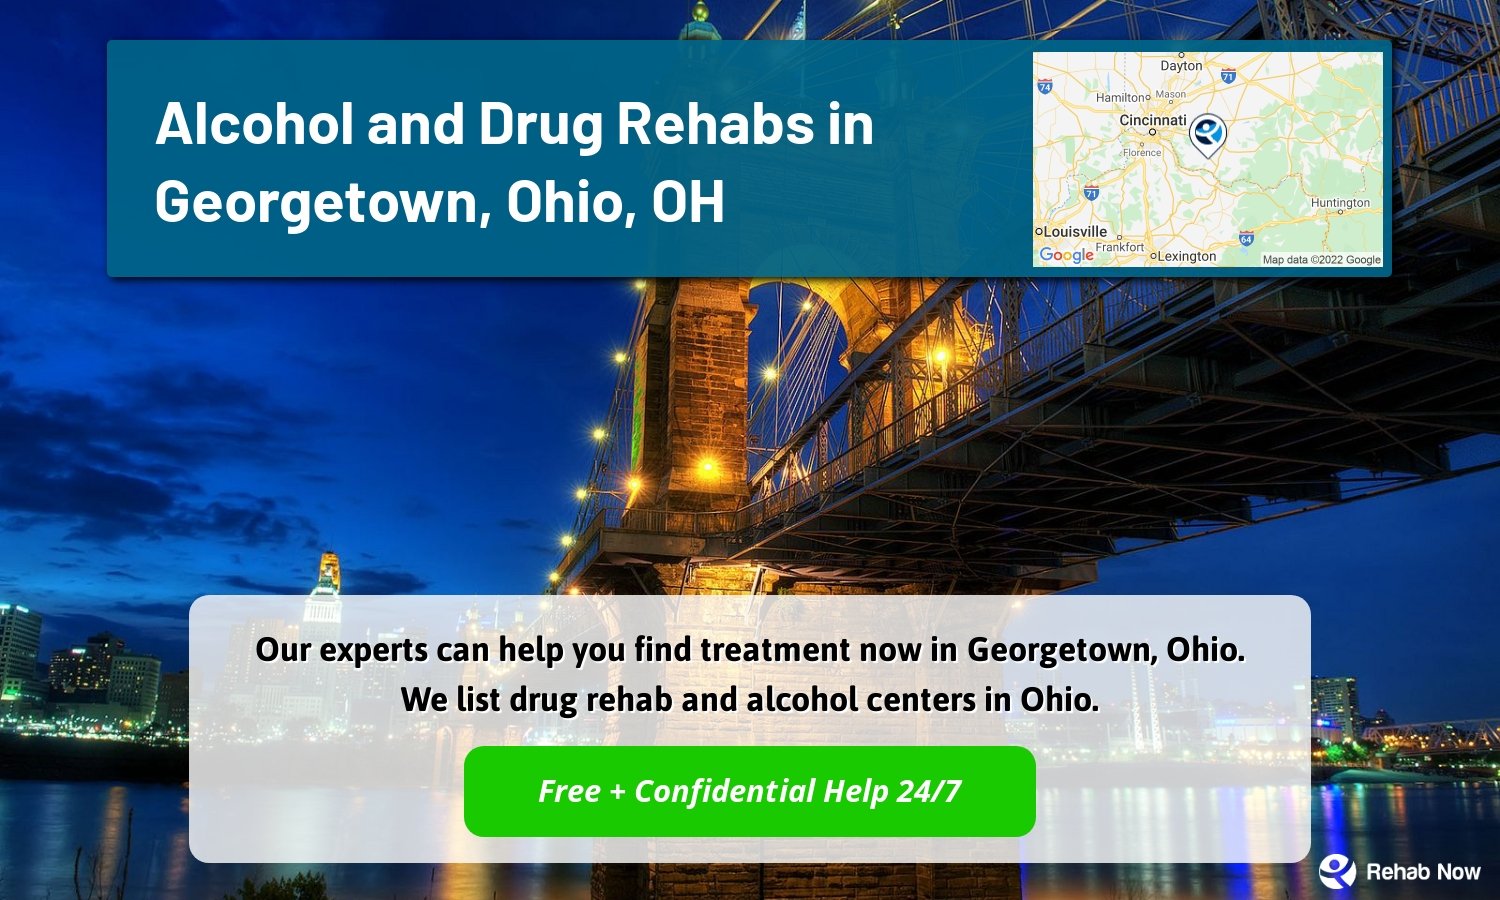 Our experts can help you find treatment now in Georgetown, Ohio. We list drug rehab and alcohol centers in Ohio.